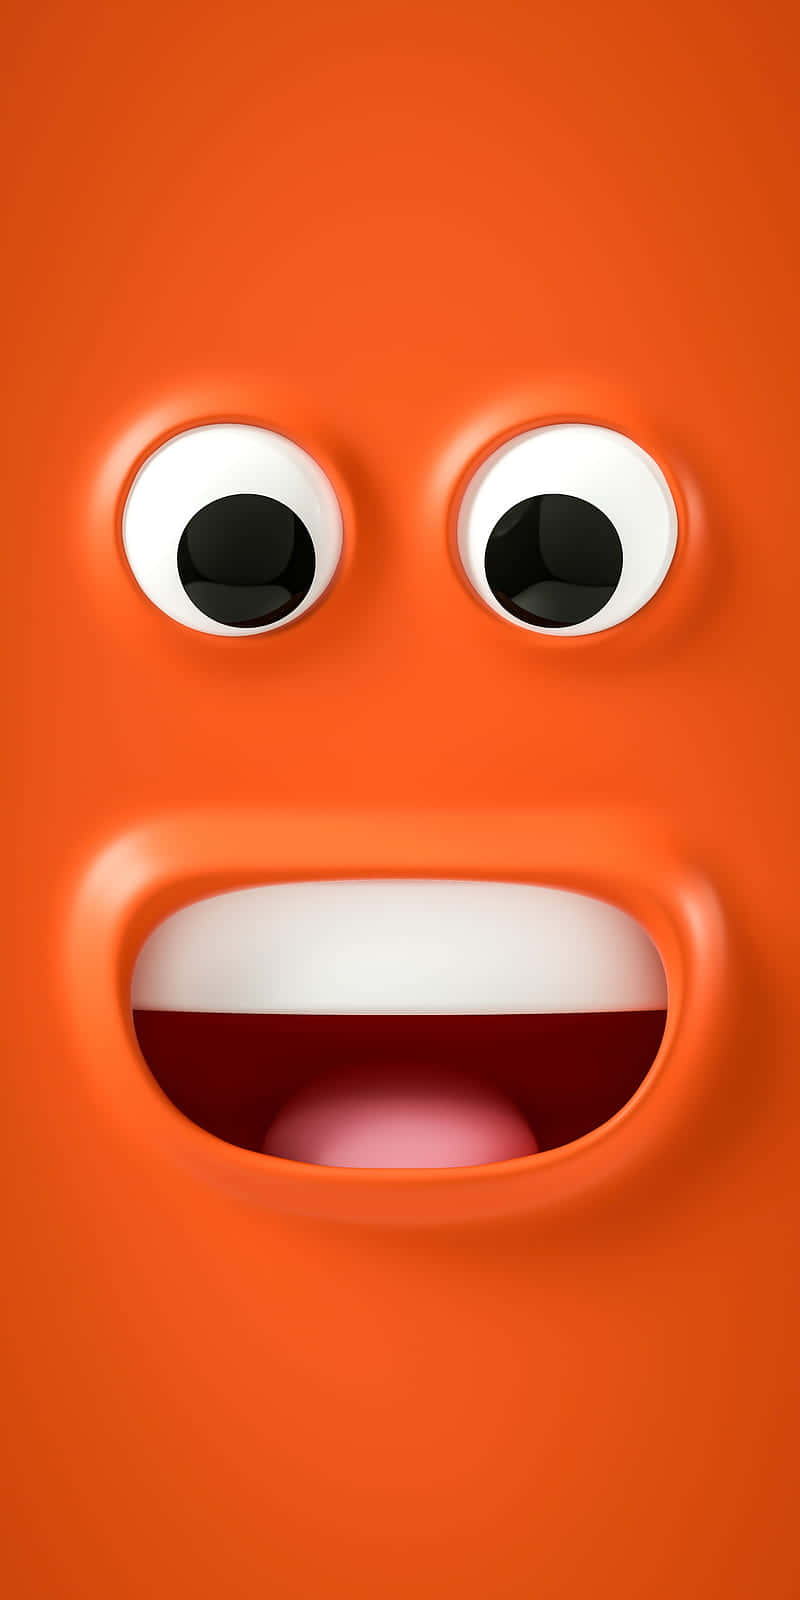 An Orange Face With Big Eyes And Big Mouth Wallpaper